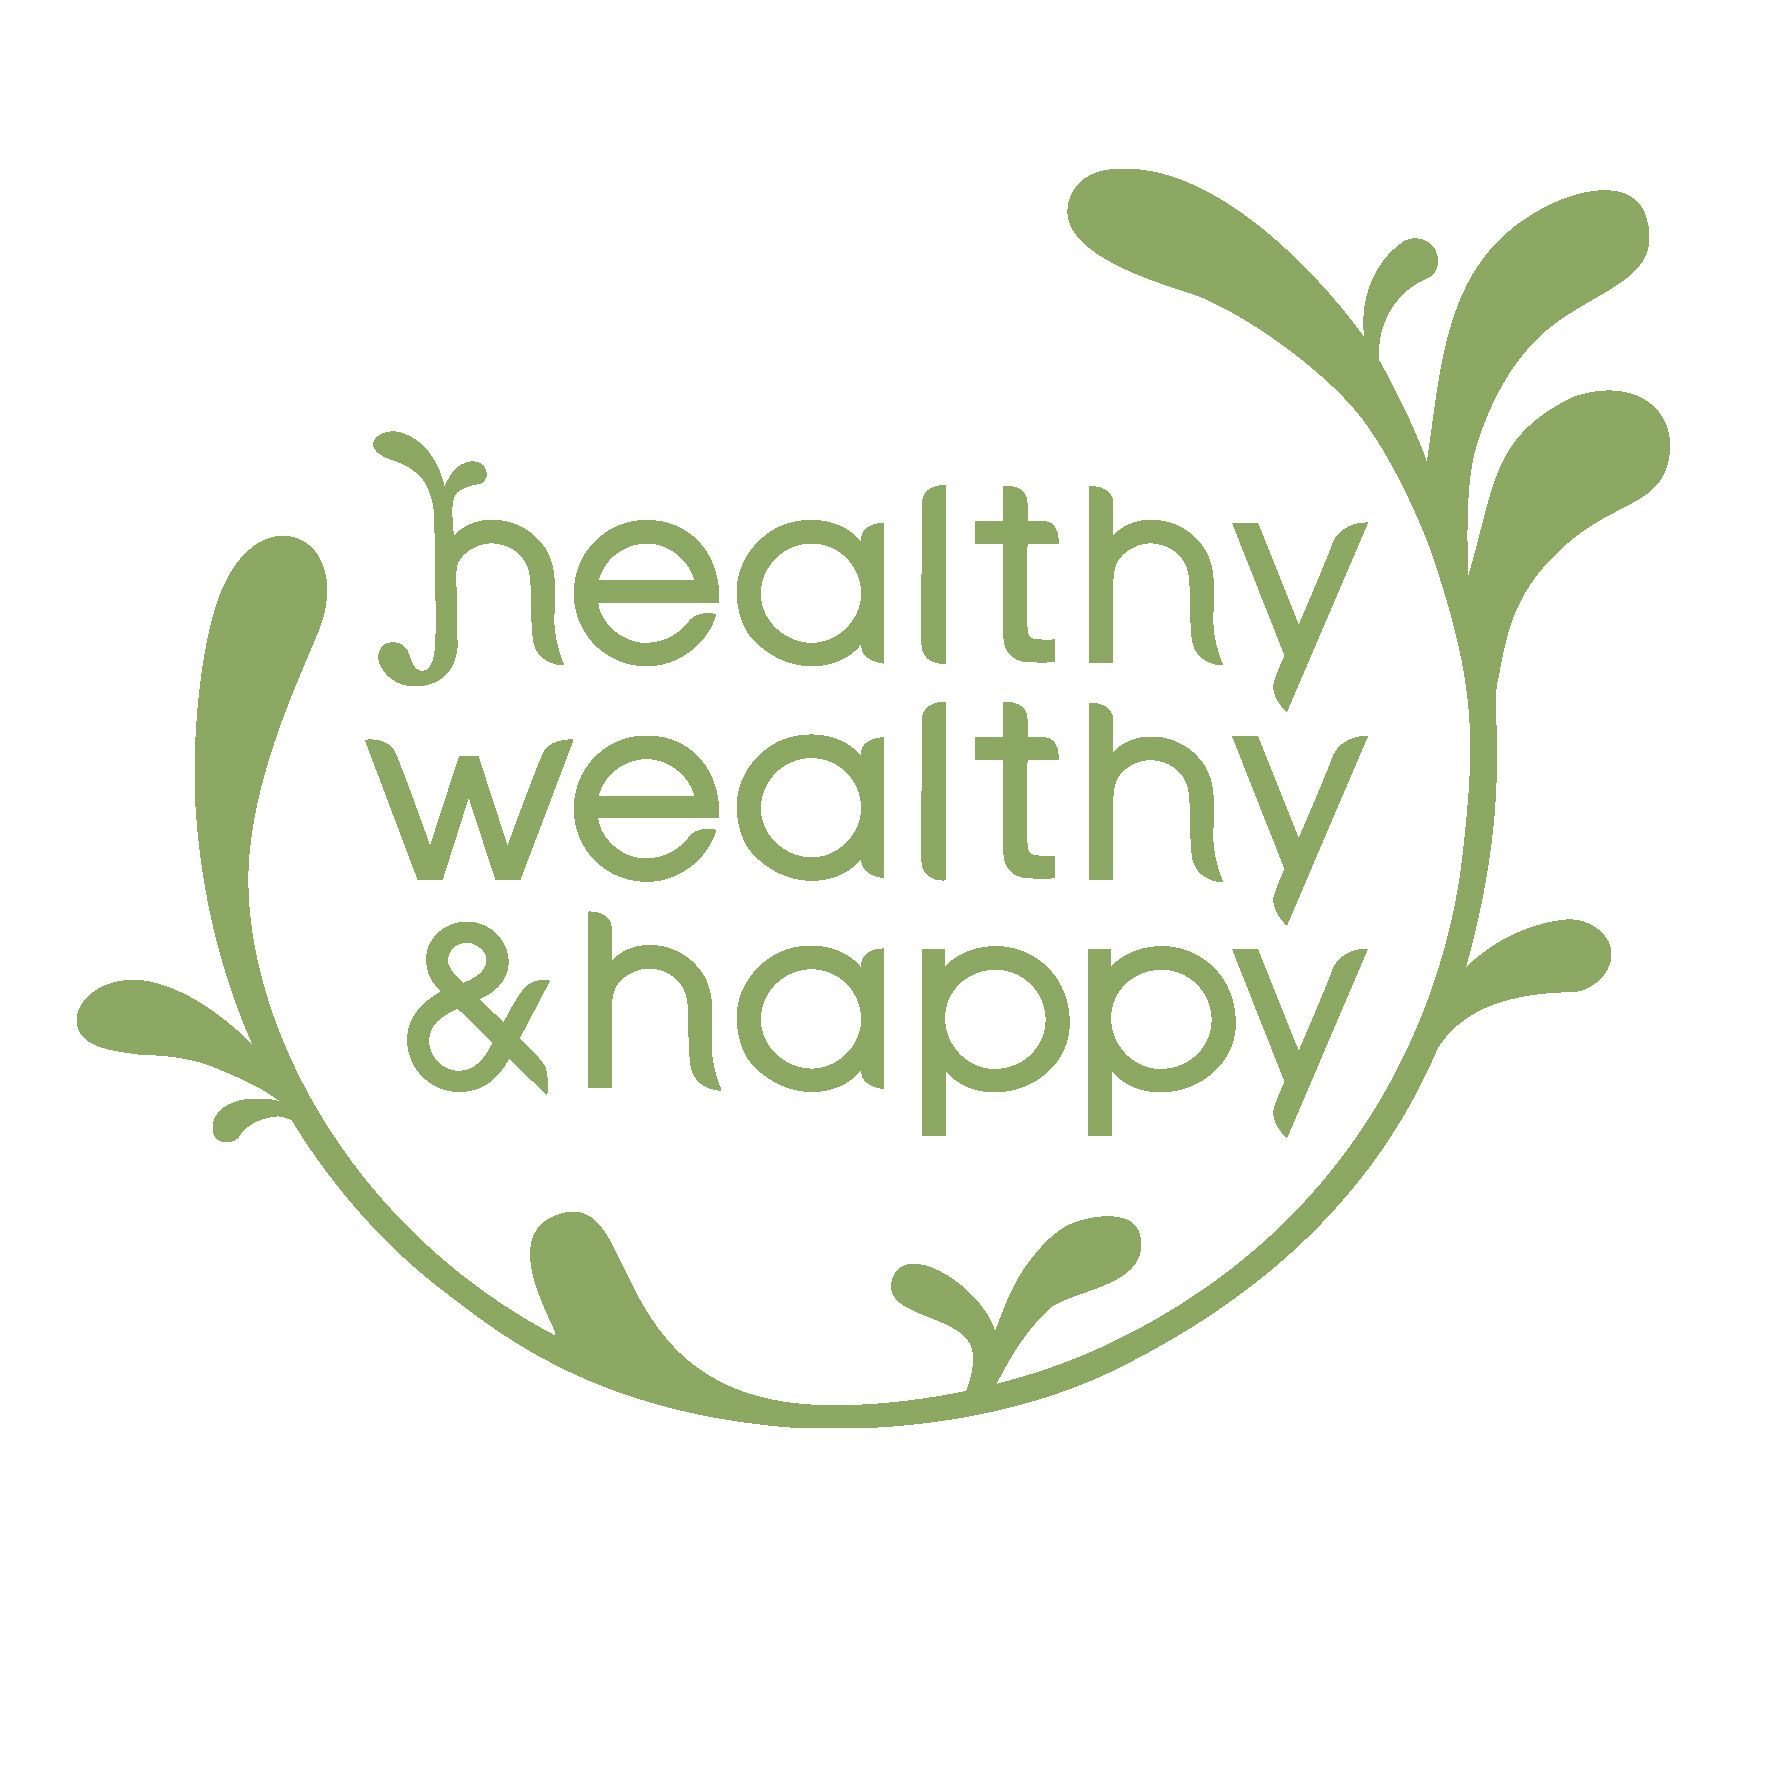 Happy is healthy